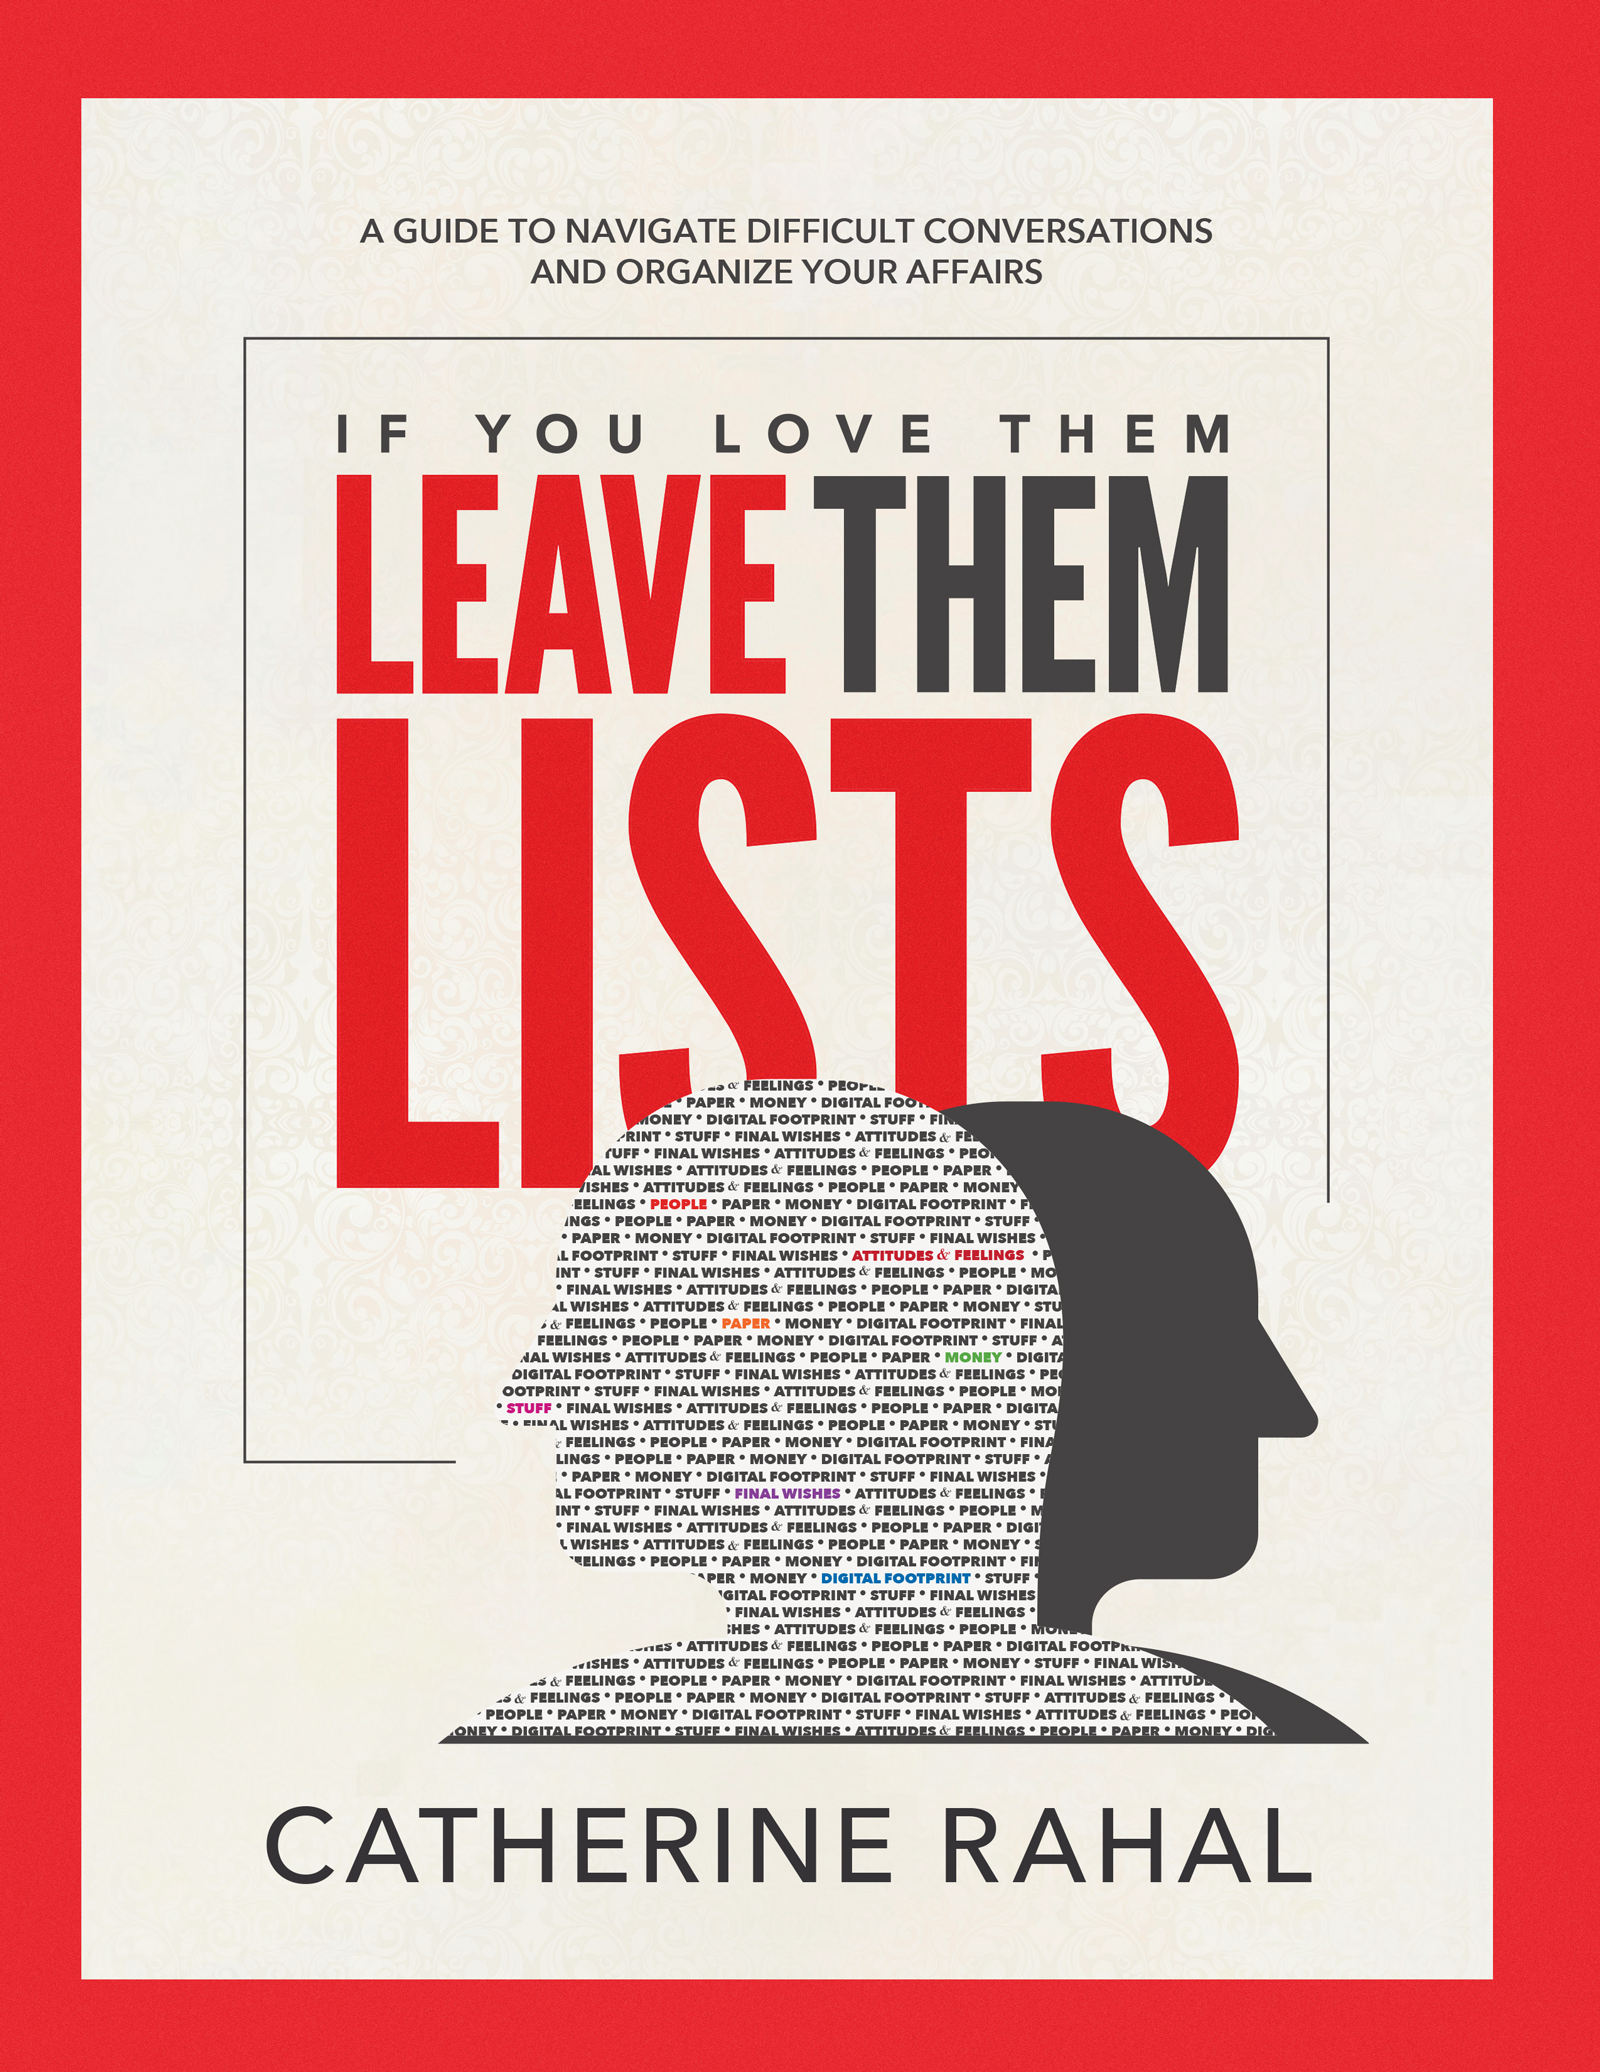 IF YOU LOVE THEM, LEAVE THEM LISTS. A guide to navigate difficult conversations and organize your affairs